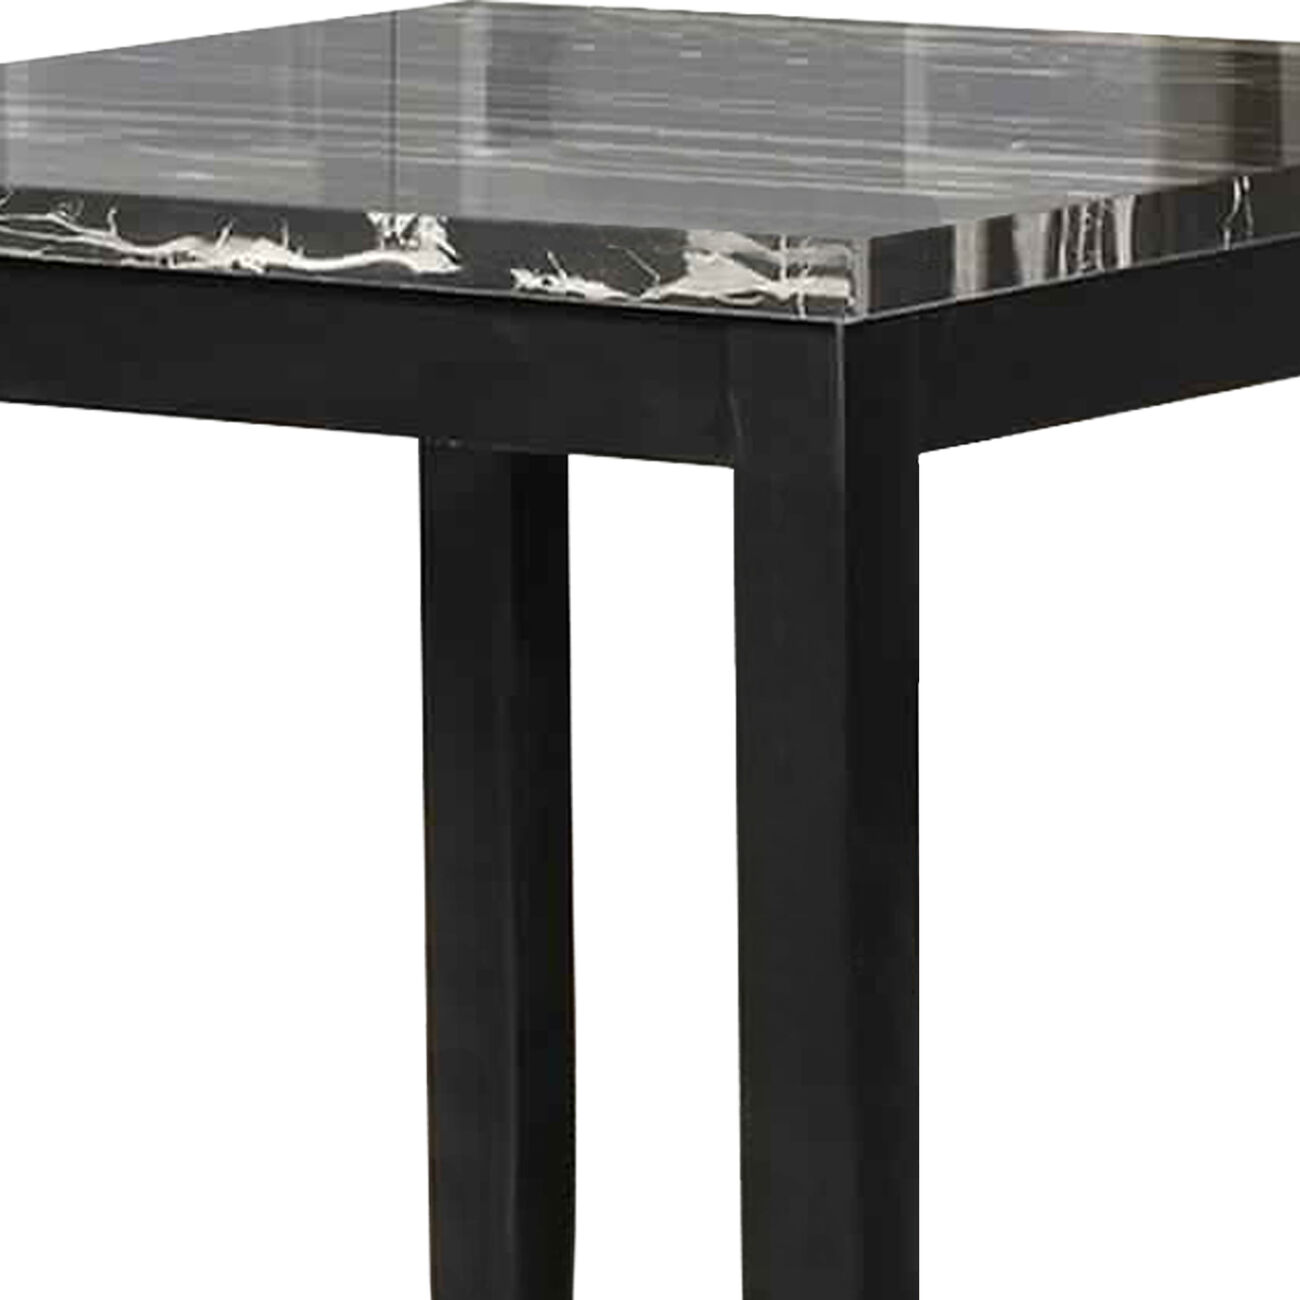 5 Piece Counter Height Dining Set with Faux Marble Tabletop, Black